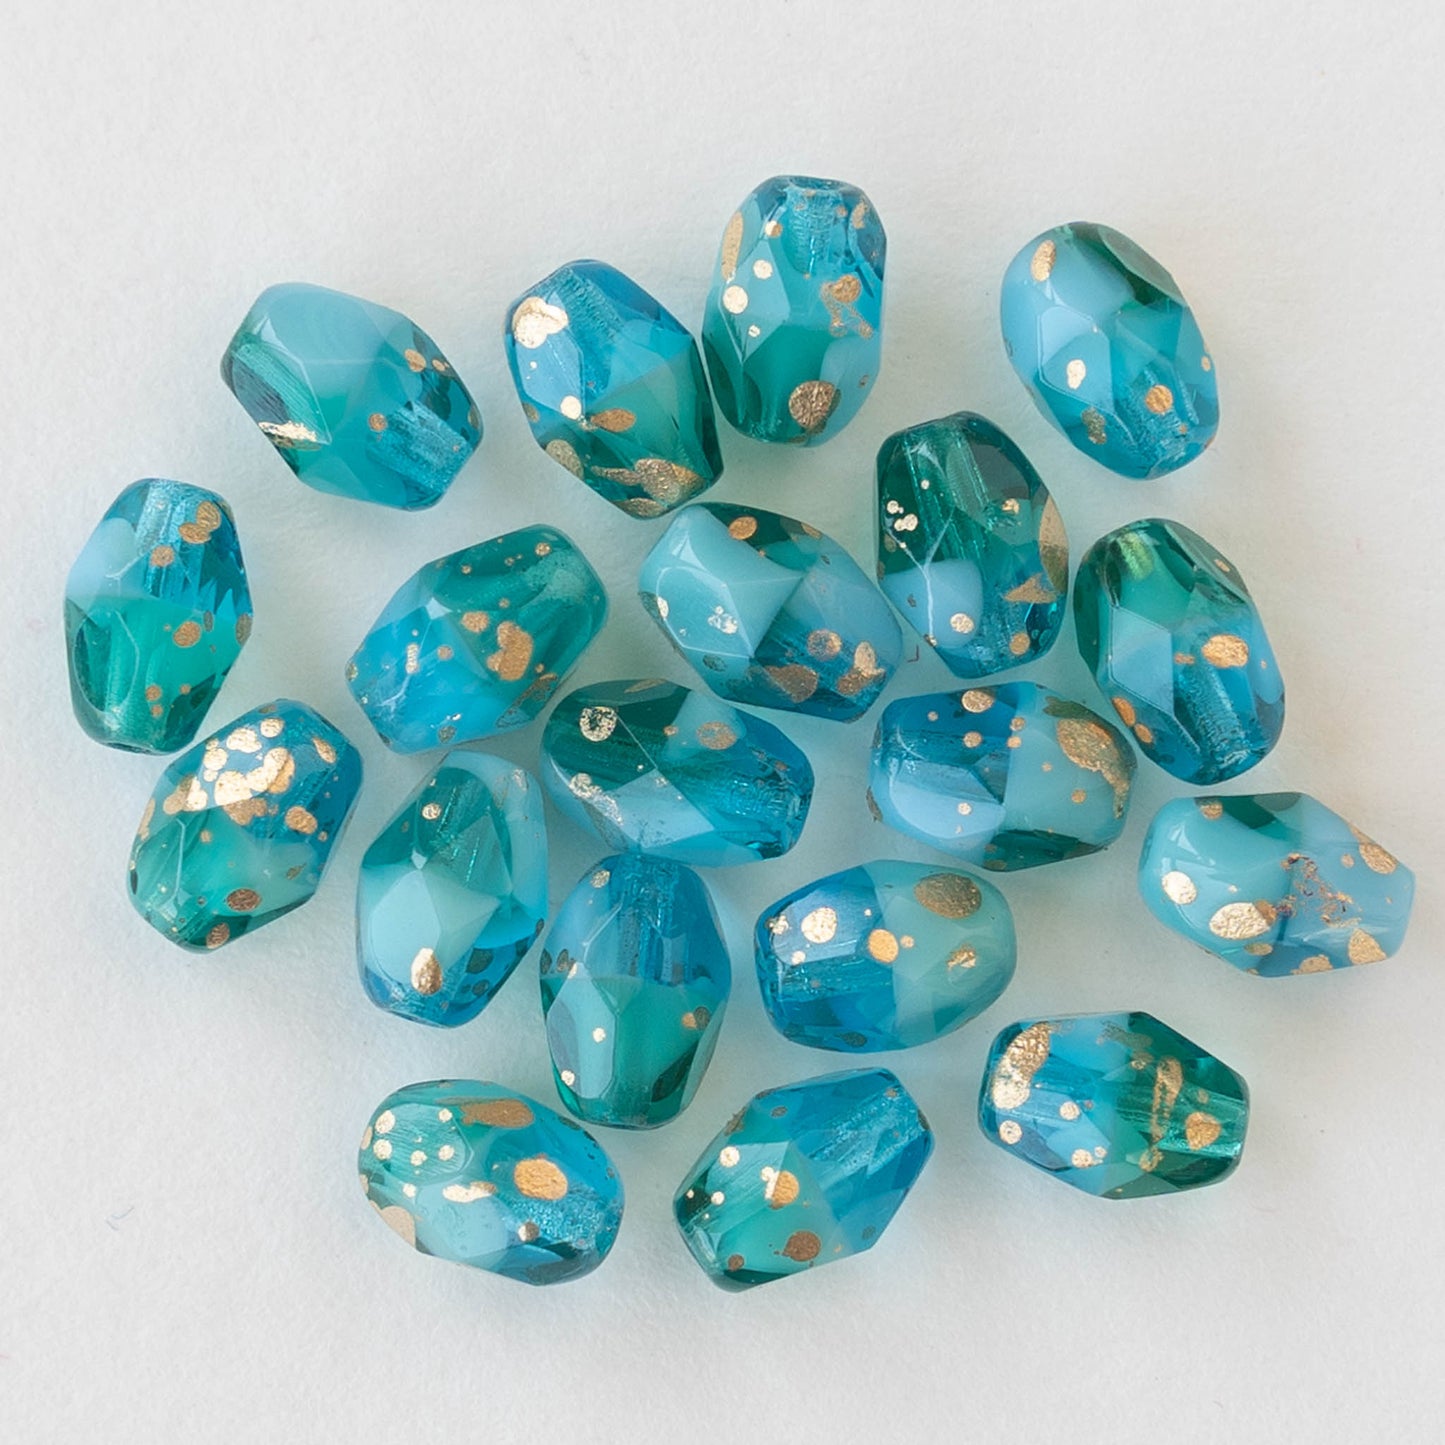 5x7mm Oval Beads - Aqua and Teal with Gold Dust - 20 beads